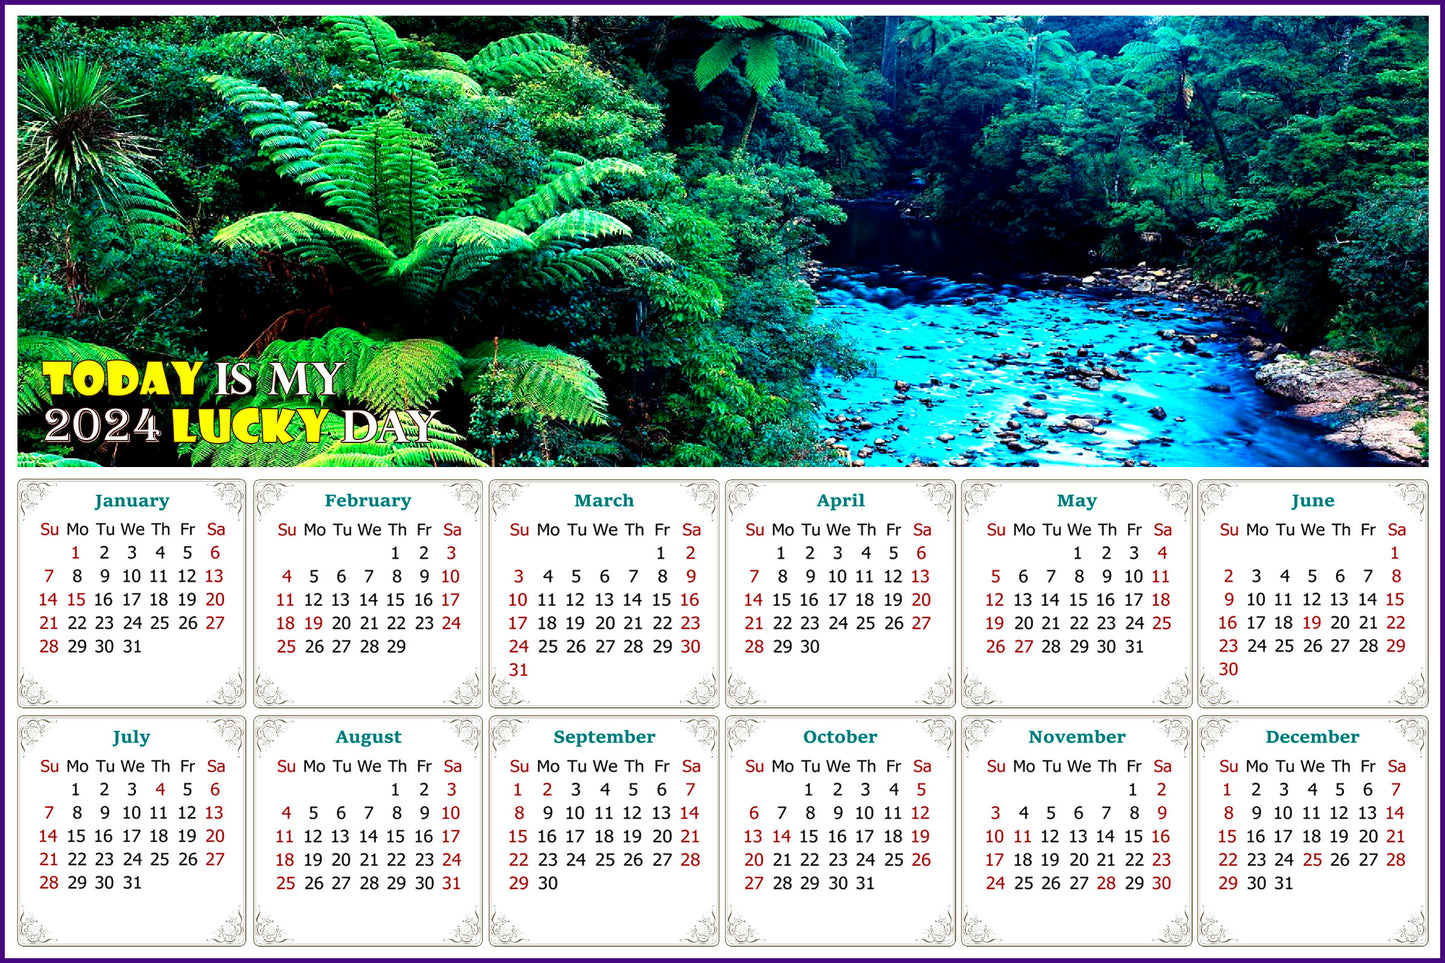 2024 Magnetic Calendar - Calendar Magnets - Today is My Lucky Day (Waipoua Kauri Reserve)